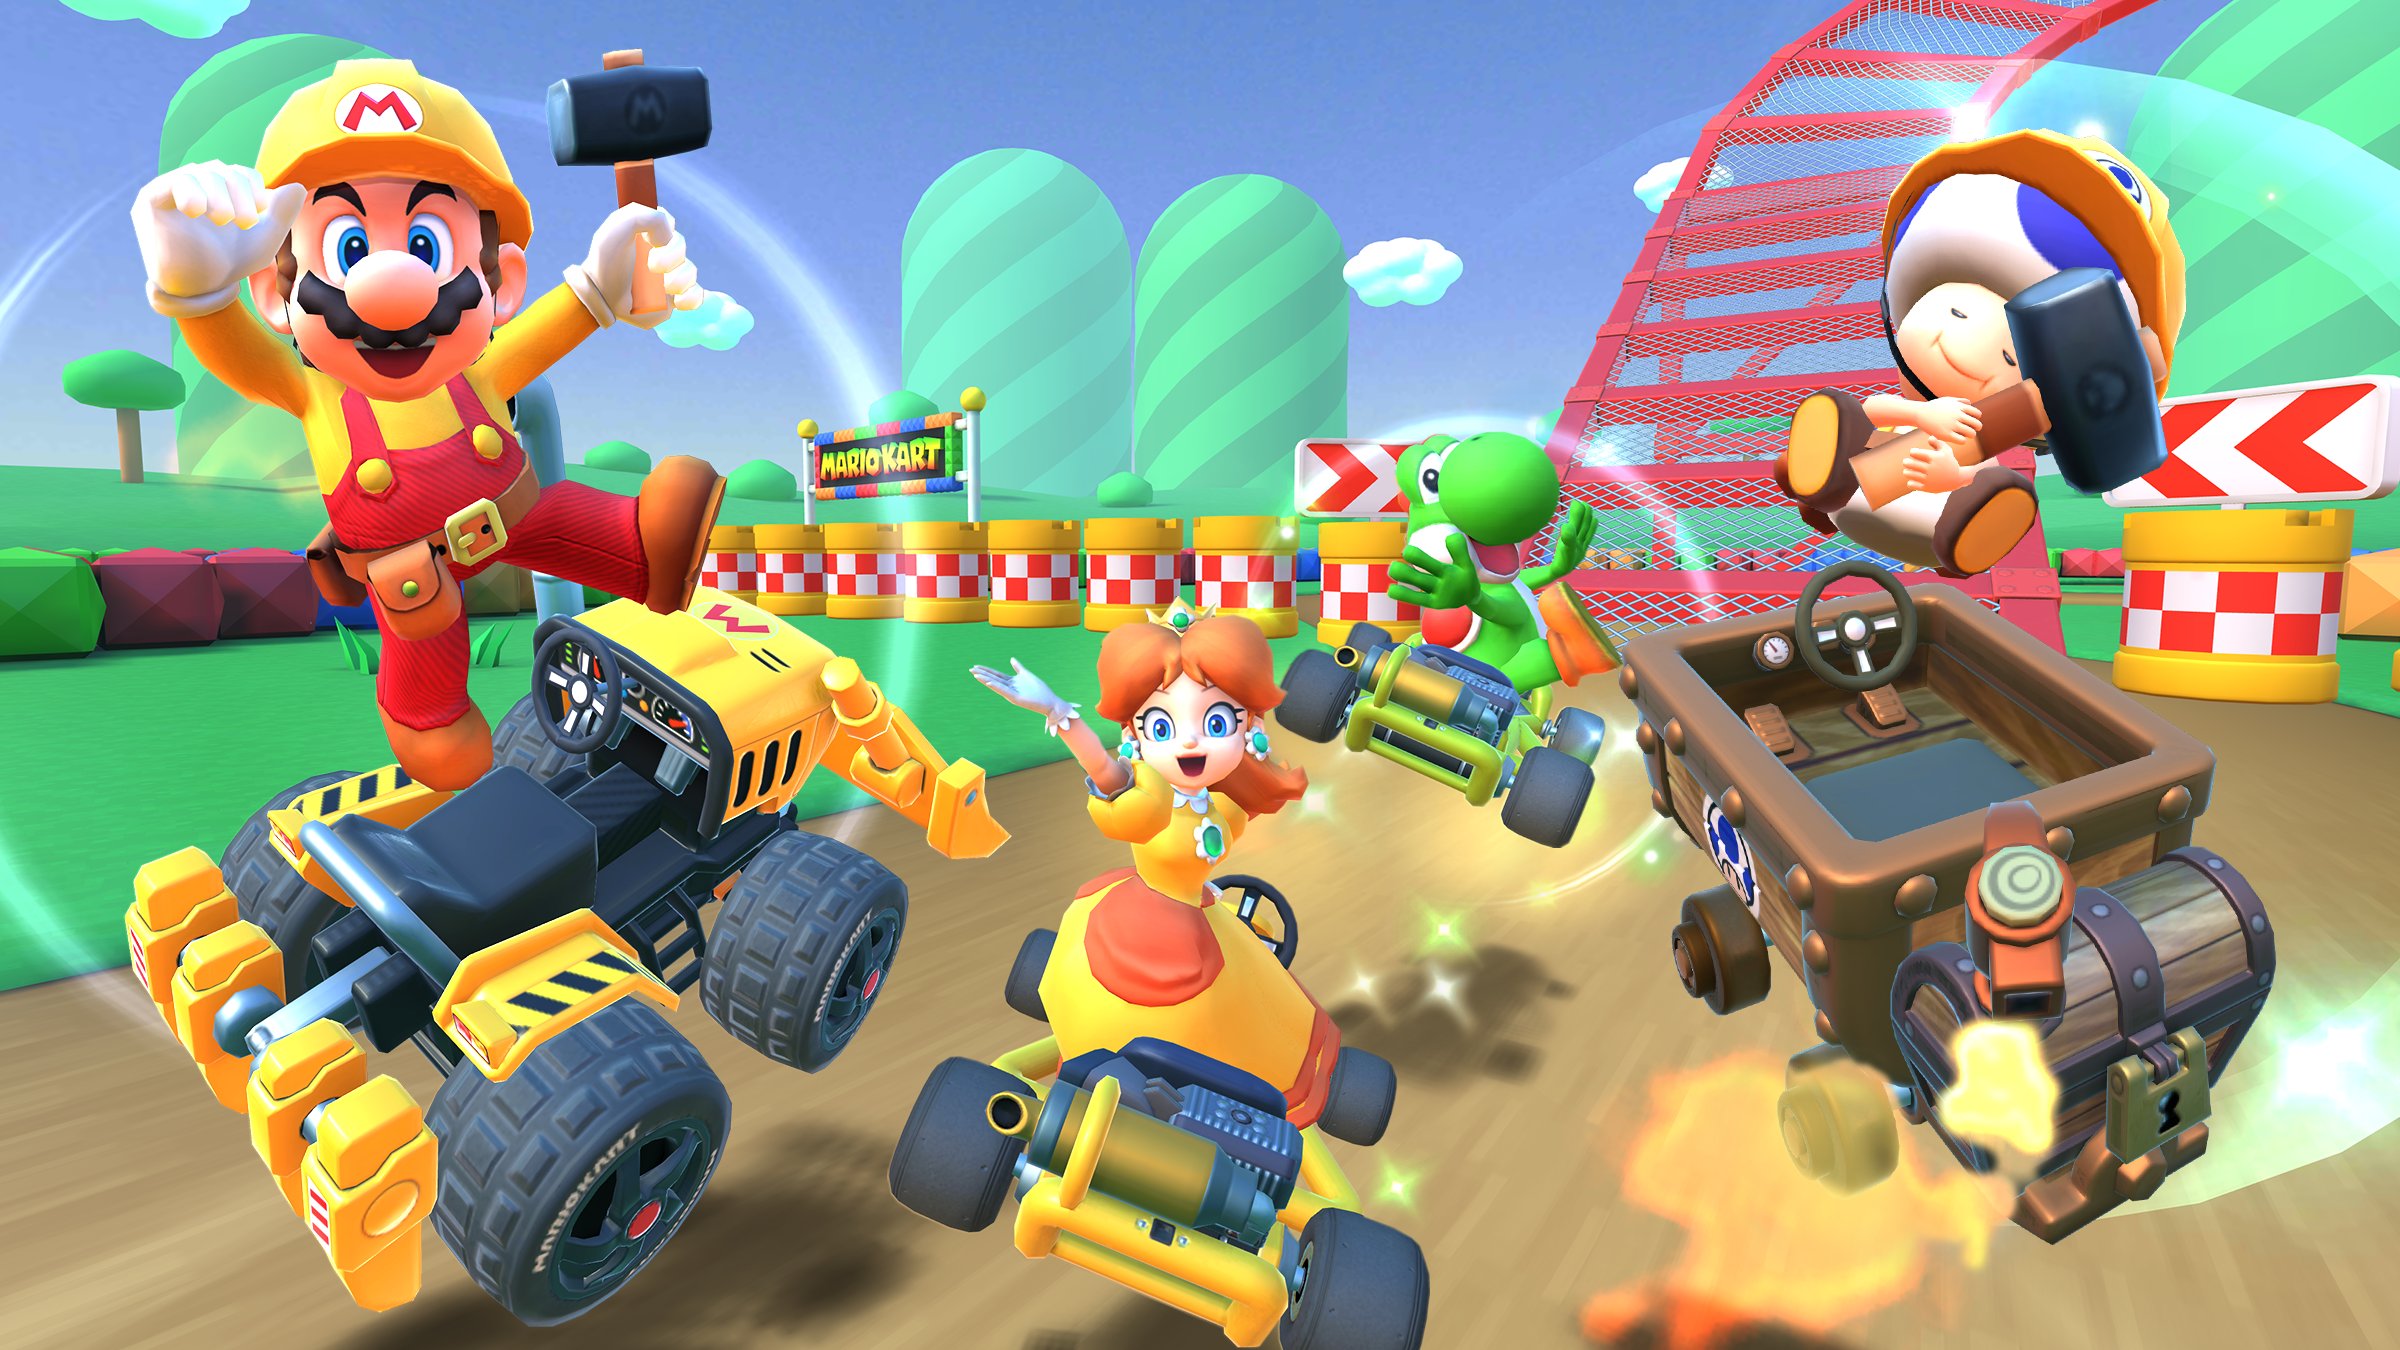 Mario Kart Tour powers up the competition with multiplayer team racing